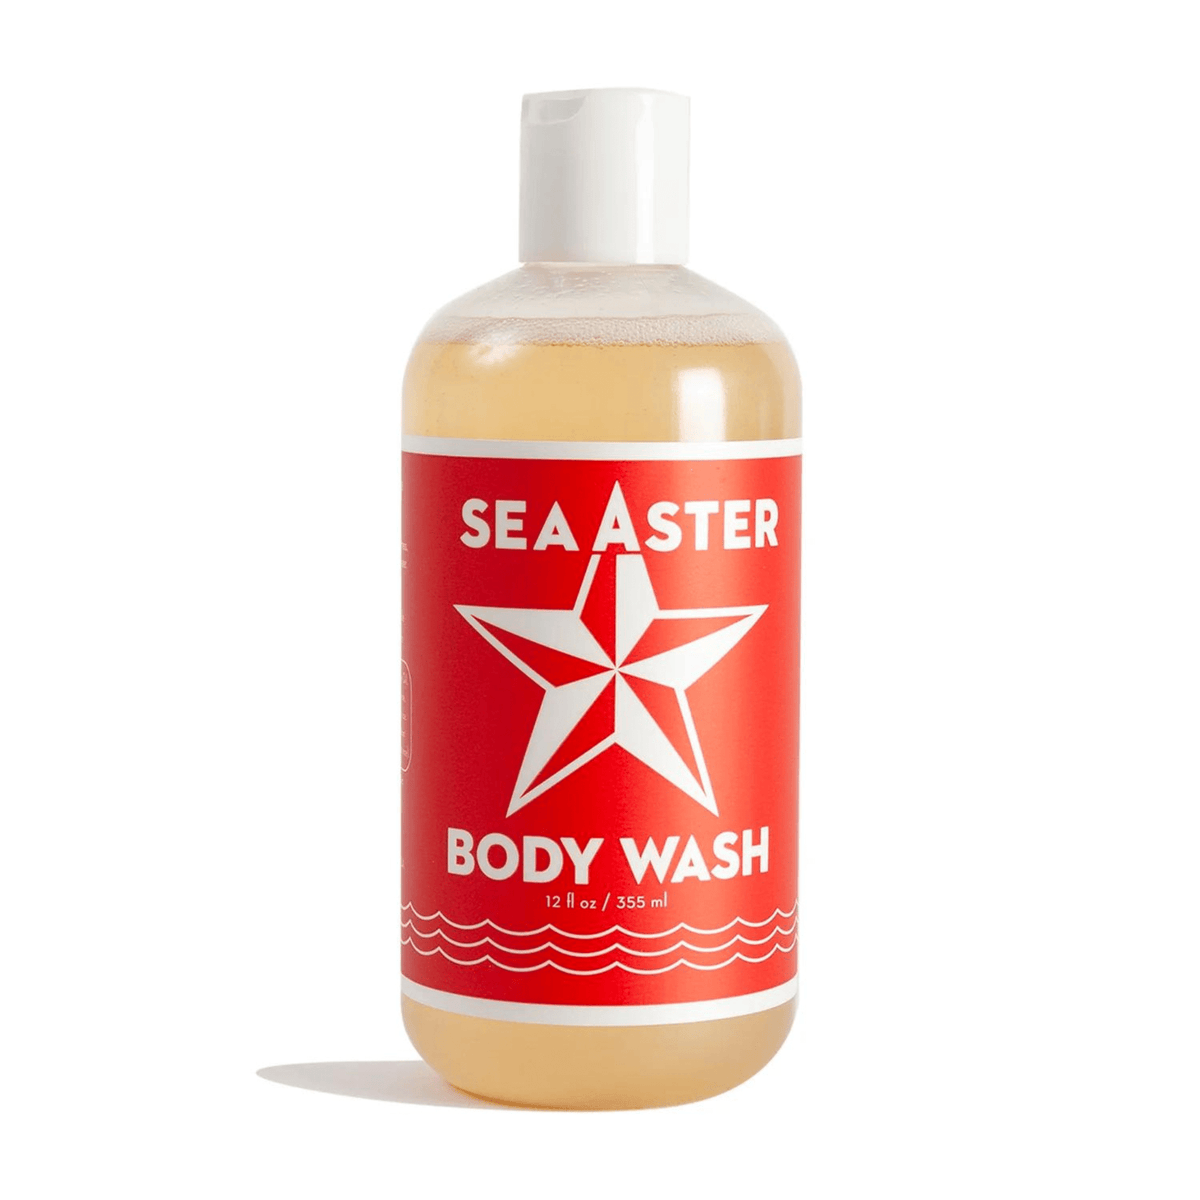 Primary Image of Sea Aster Body Wash